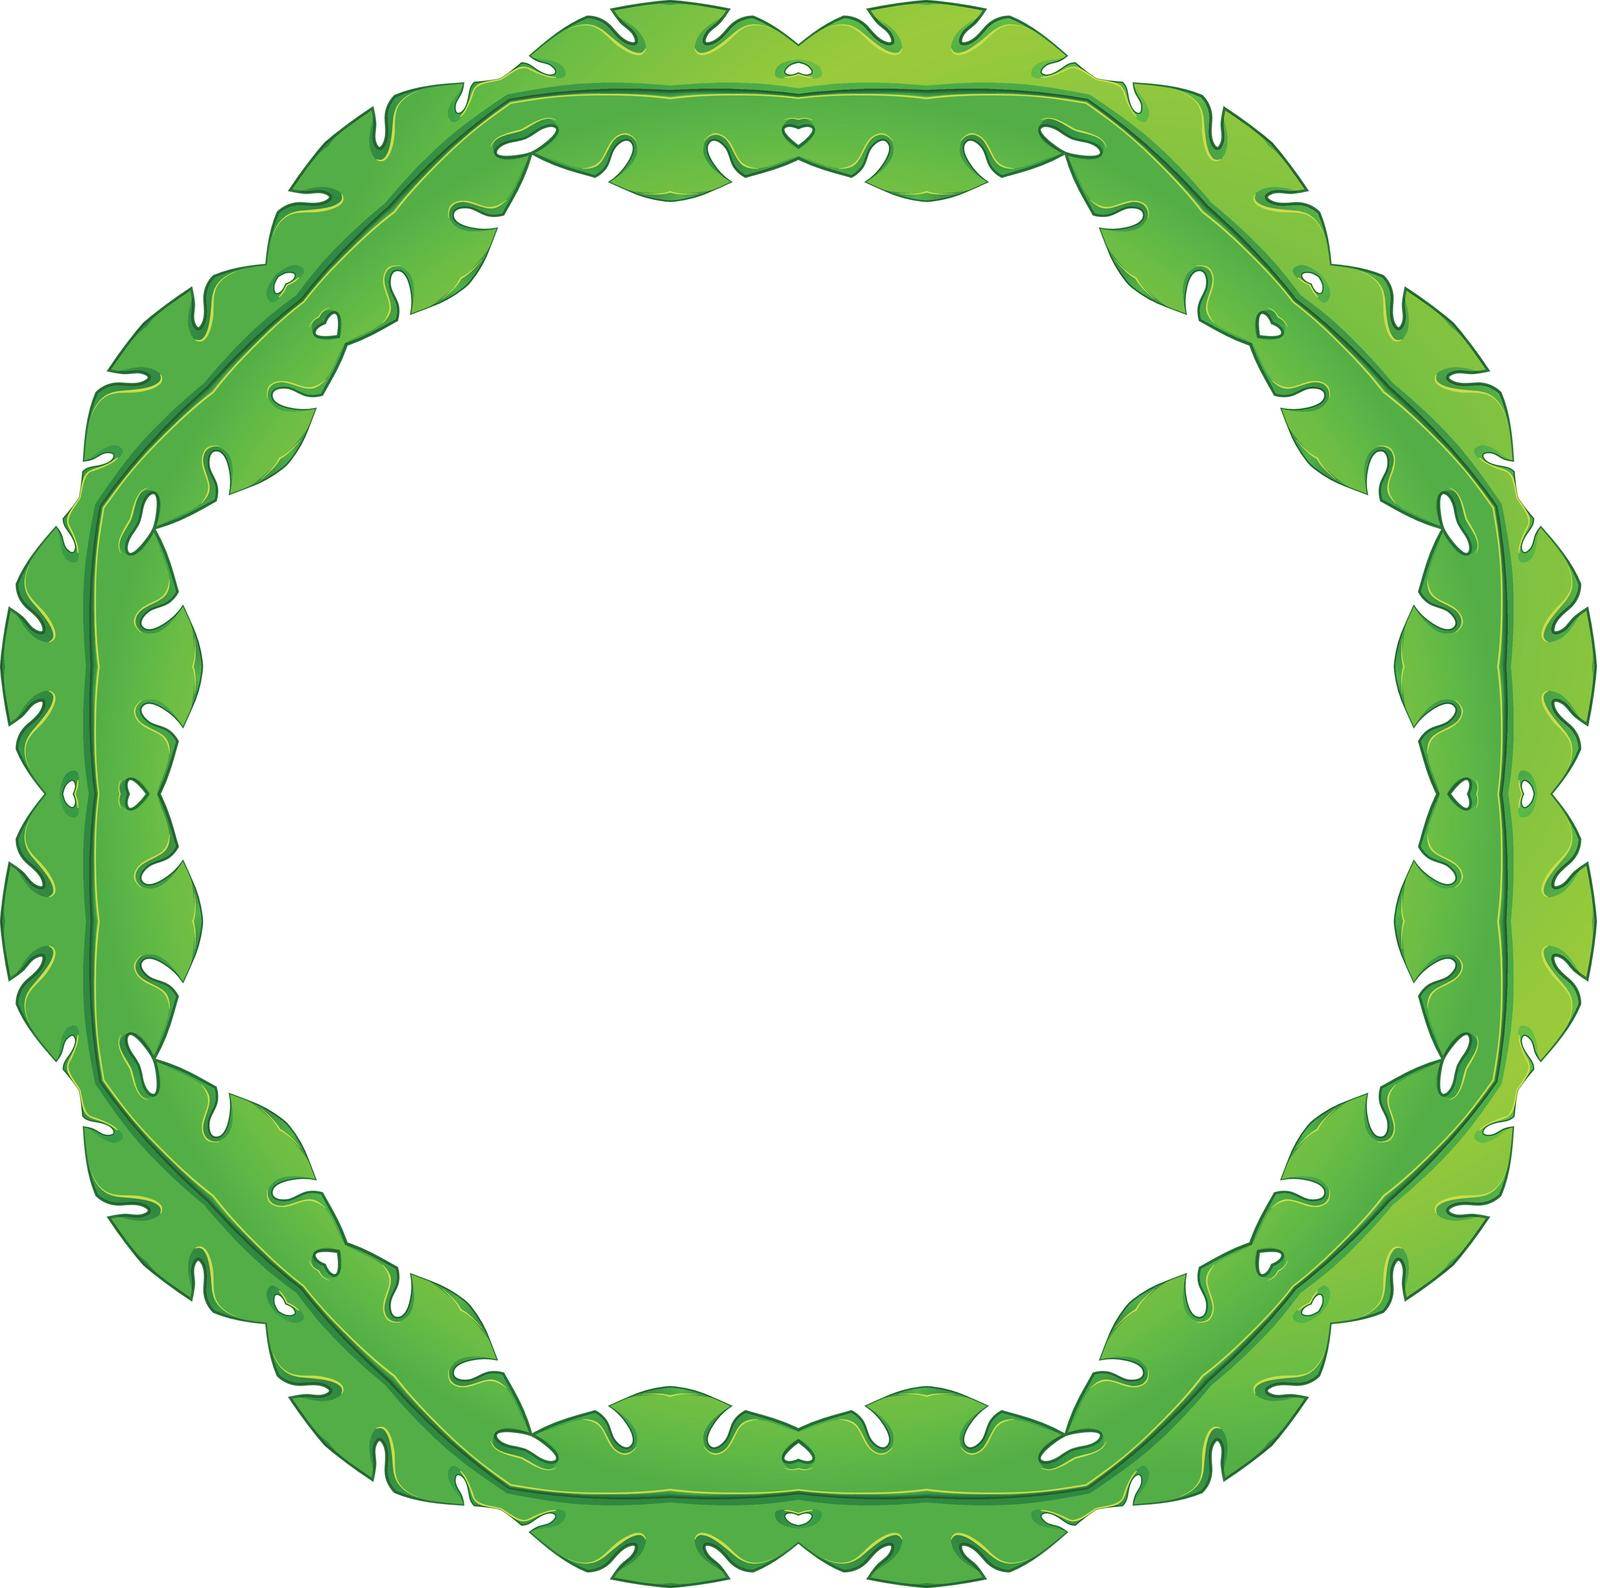 Illustration of a green frame made of leaves on a white background